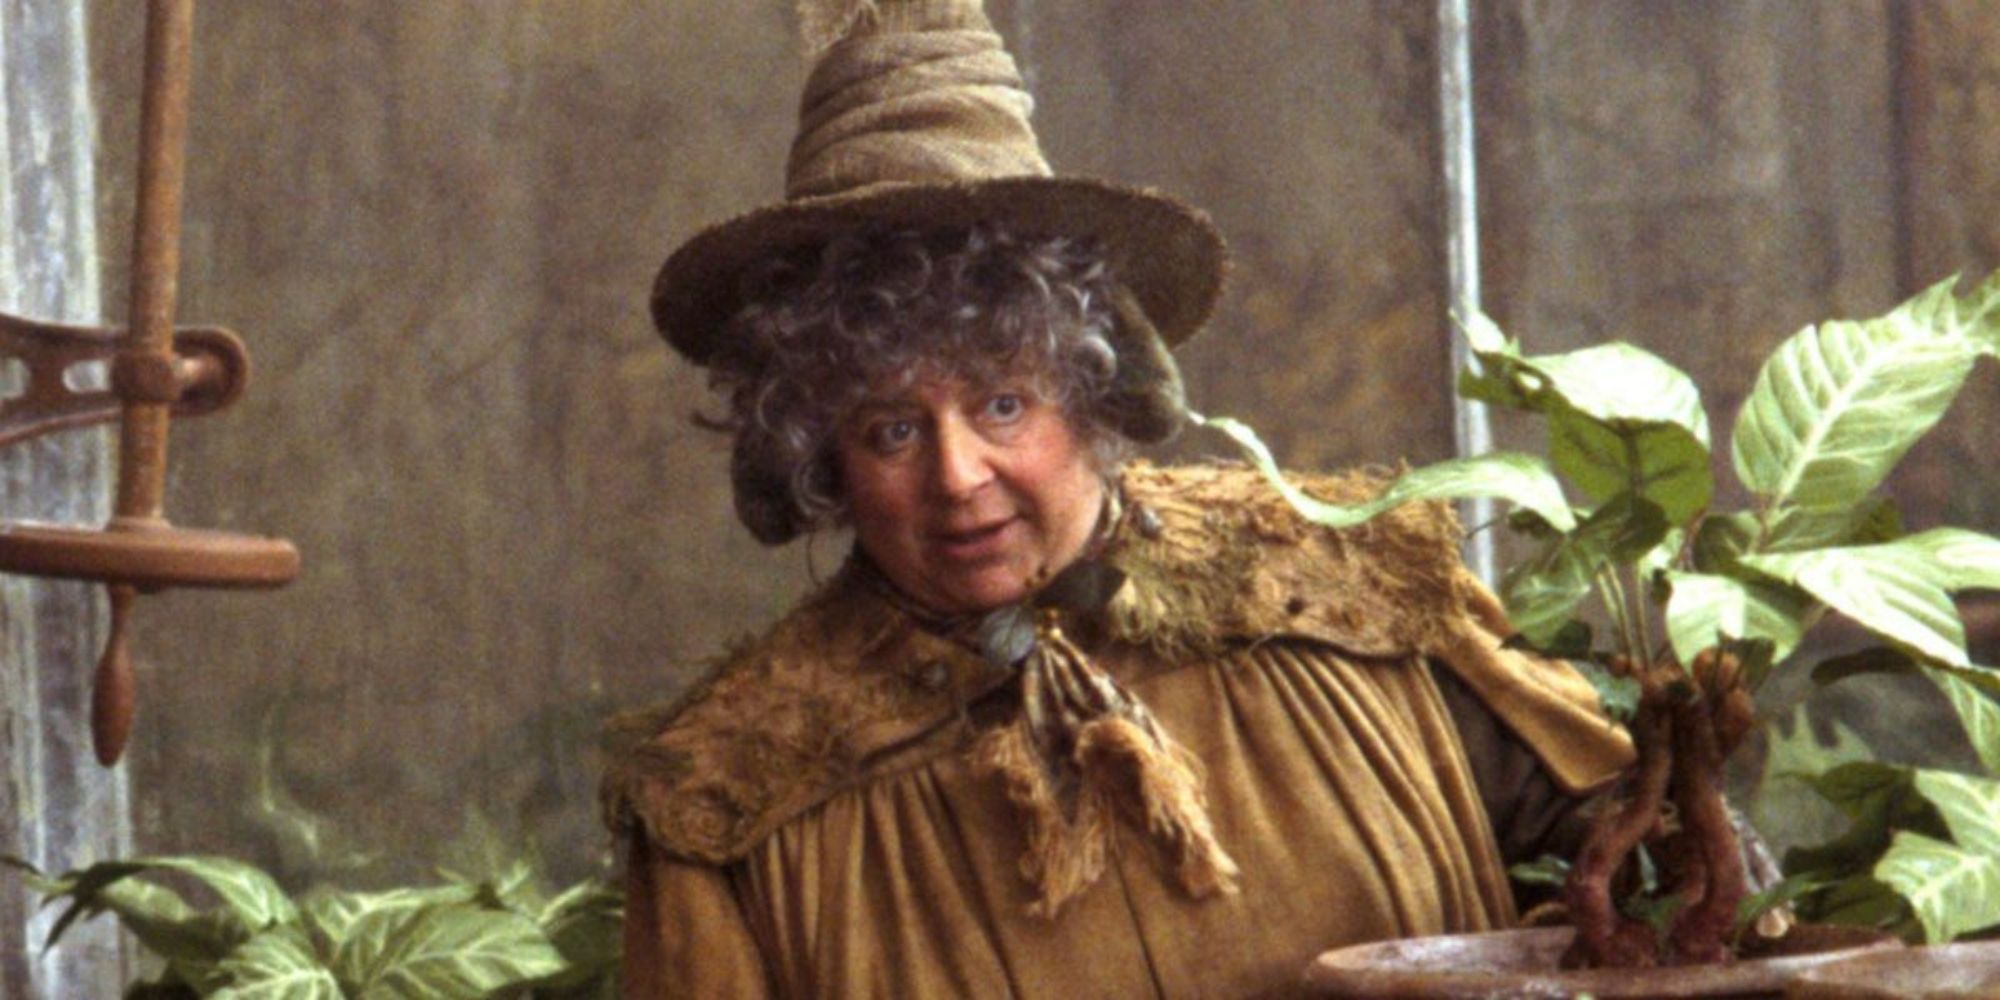 Professor Sprout teaching Herbology